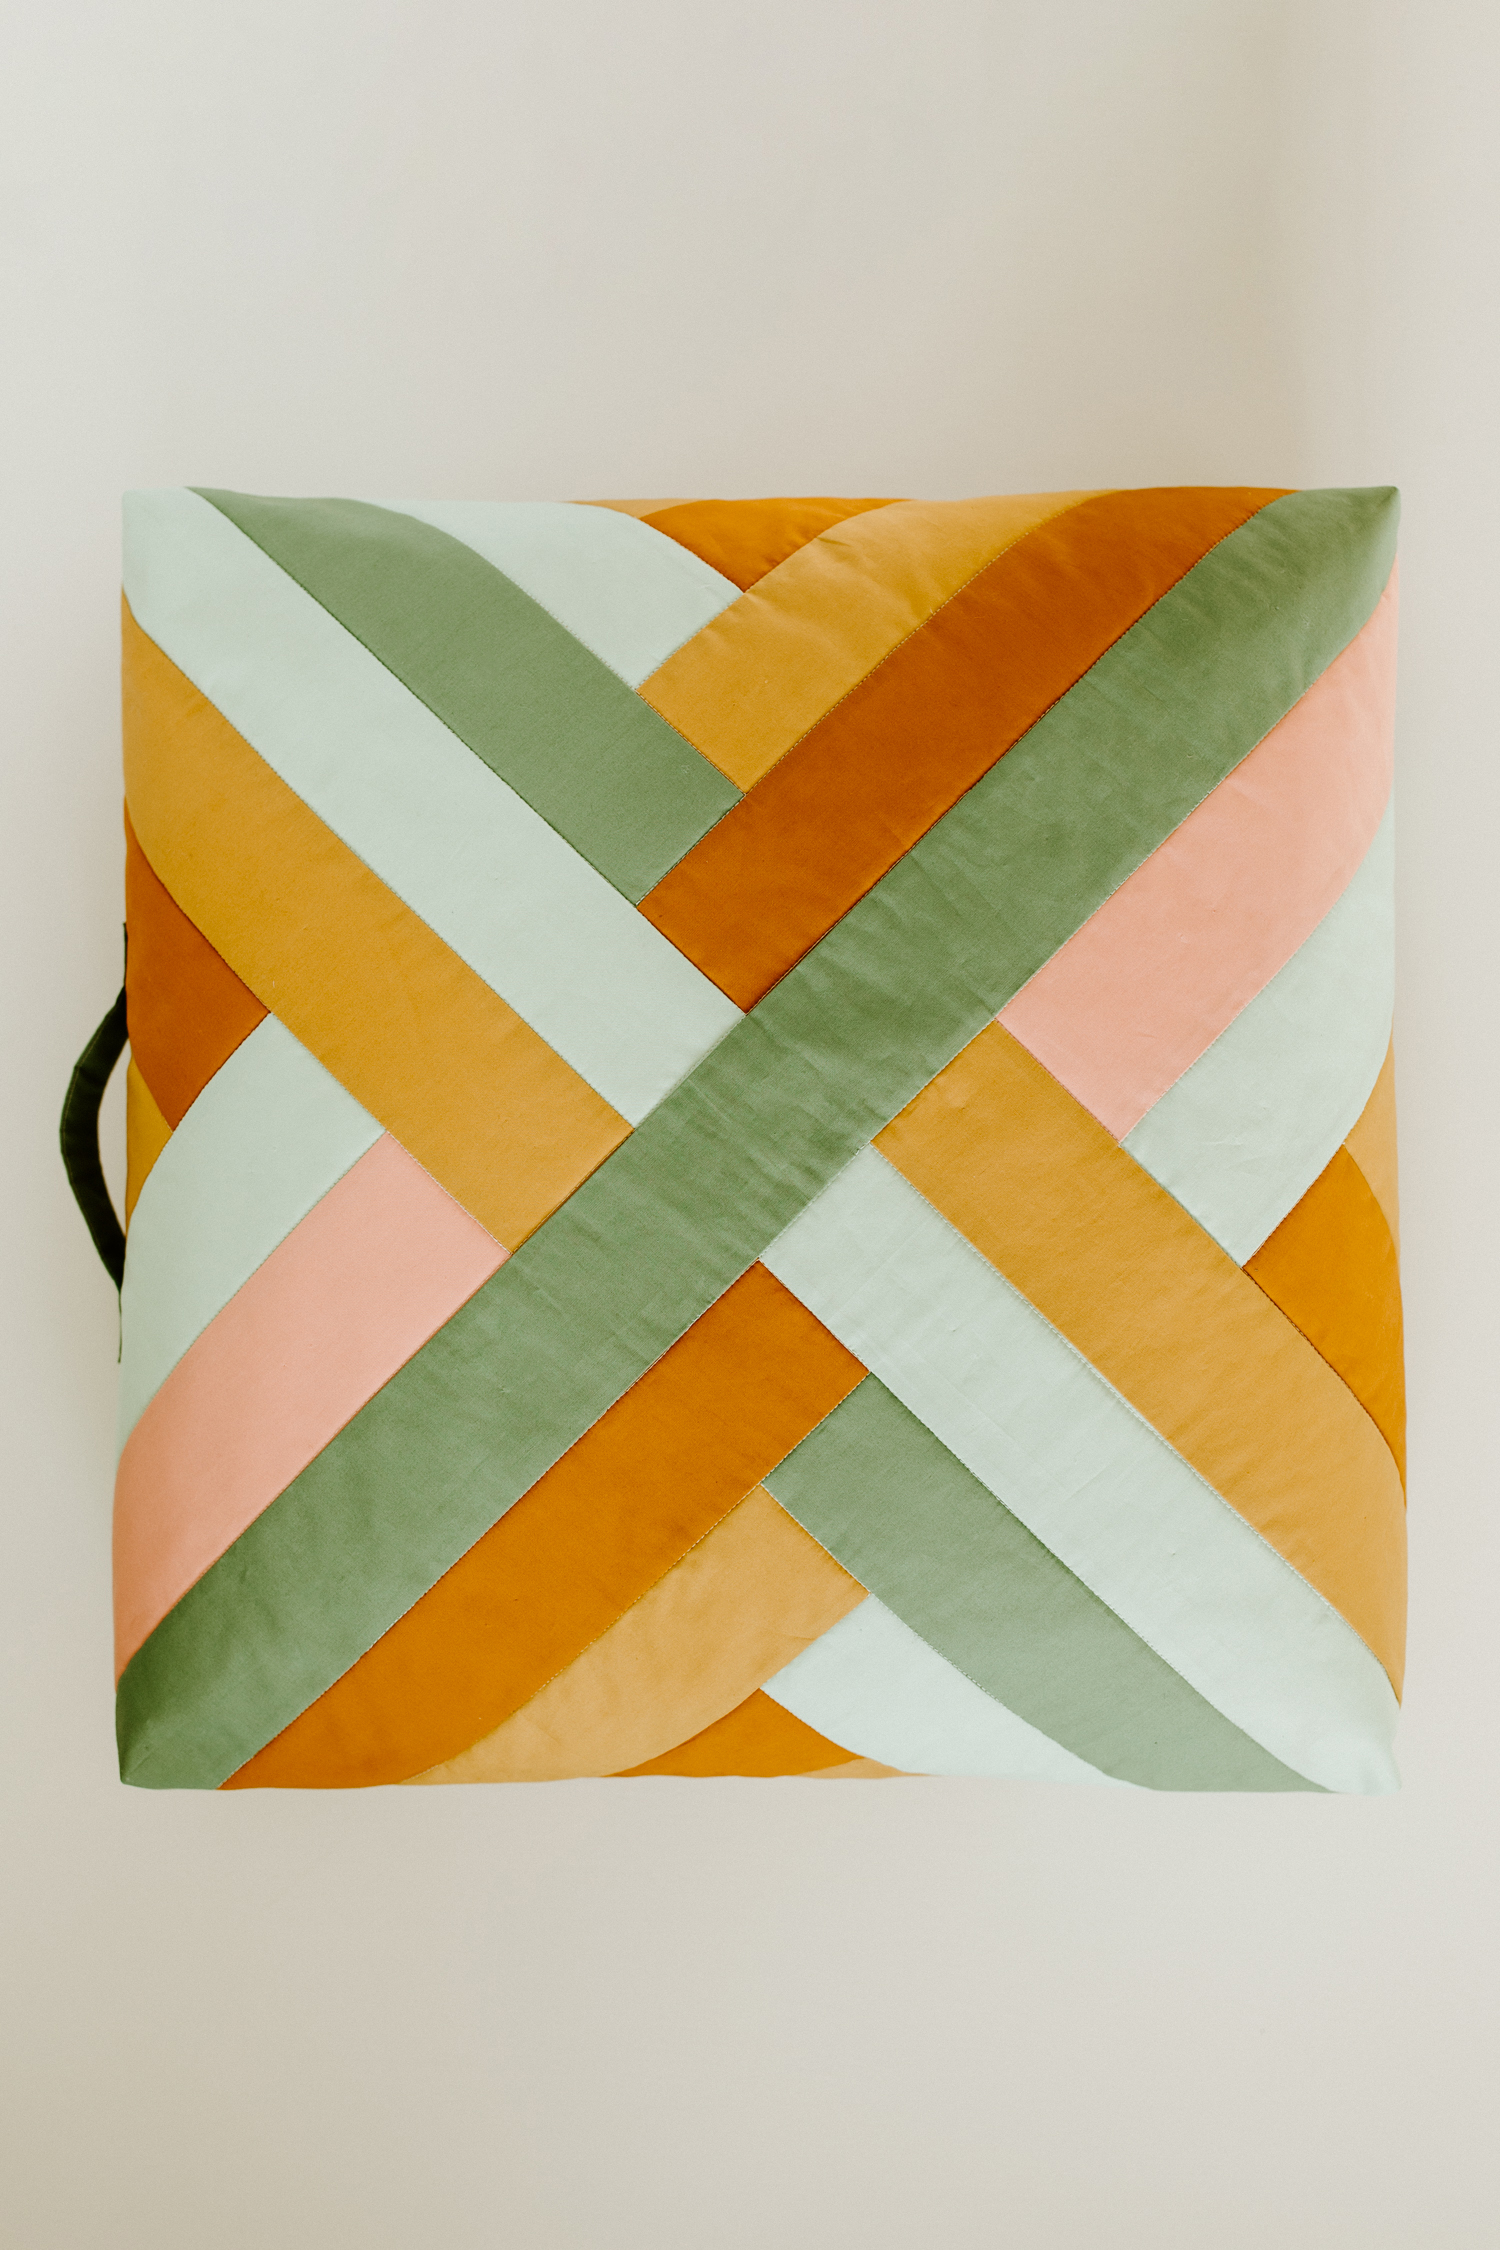 This quilted floor pillow tutorial walks you through step-by-step instructions to sew a floor pillow using the Maypole wall hanging pattern. suzyquilts.com #sewingtutorial #sewingdiy